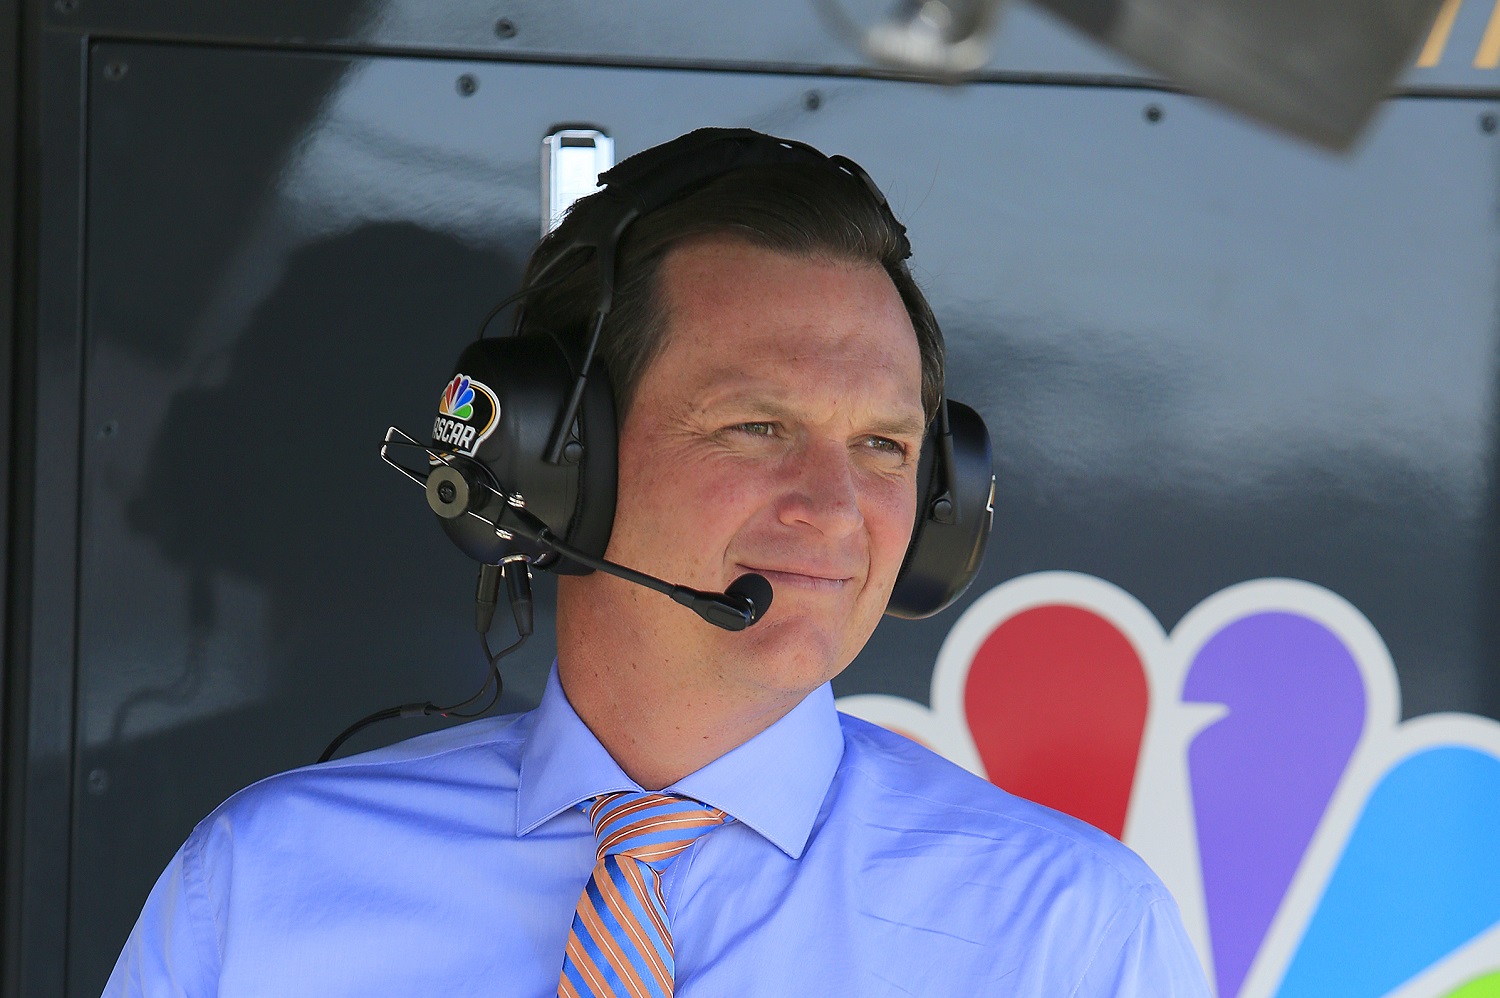 Steve Letarte of NBC during the running of the 1000Bulbs.com Monster Energy NASCAR Cup Series Race on Oct. 14, 2018 at the Talladega Superspeedway.